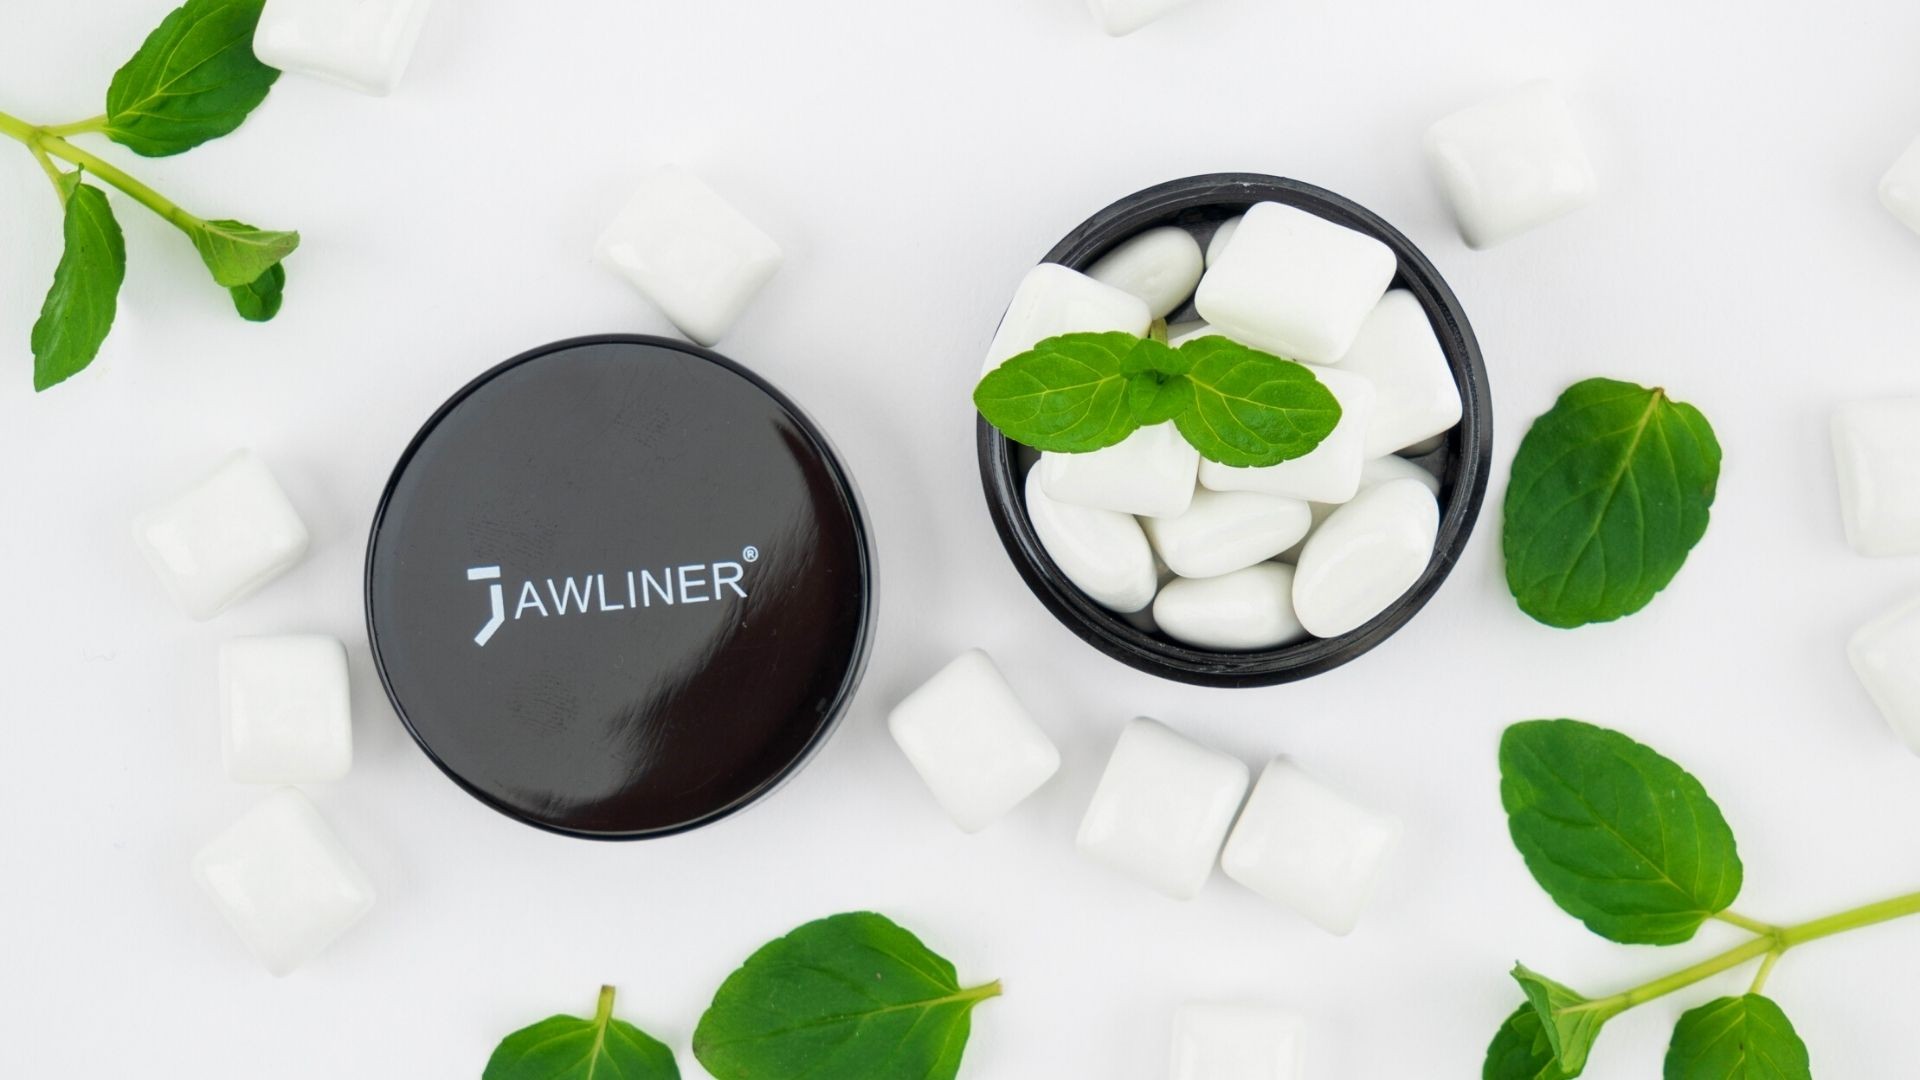 JAWLINER Fitness Chewing Gum (2 months pack) Jawline Gum - Sugar Free Gum -  Ginger Lime Gum - Jawline Exerciser For Mewing And Shapen The Jaw - 15x  Harder Than Regular Gum : Grocery & Gourmet Food 